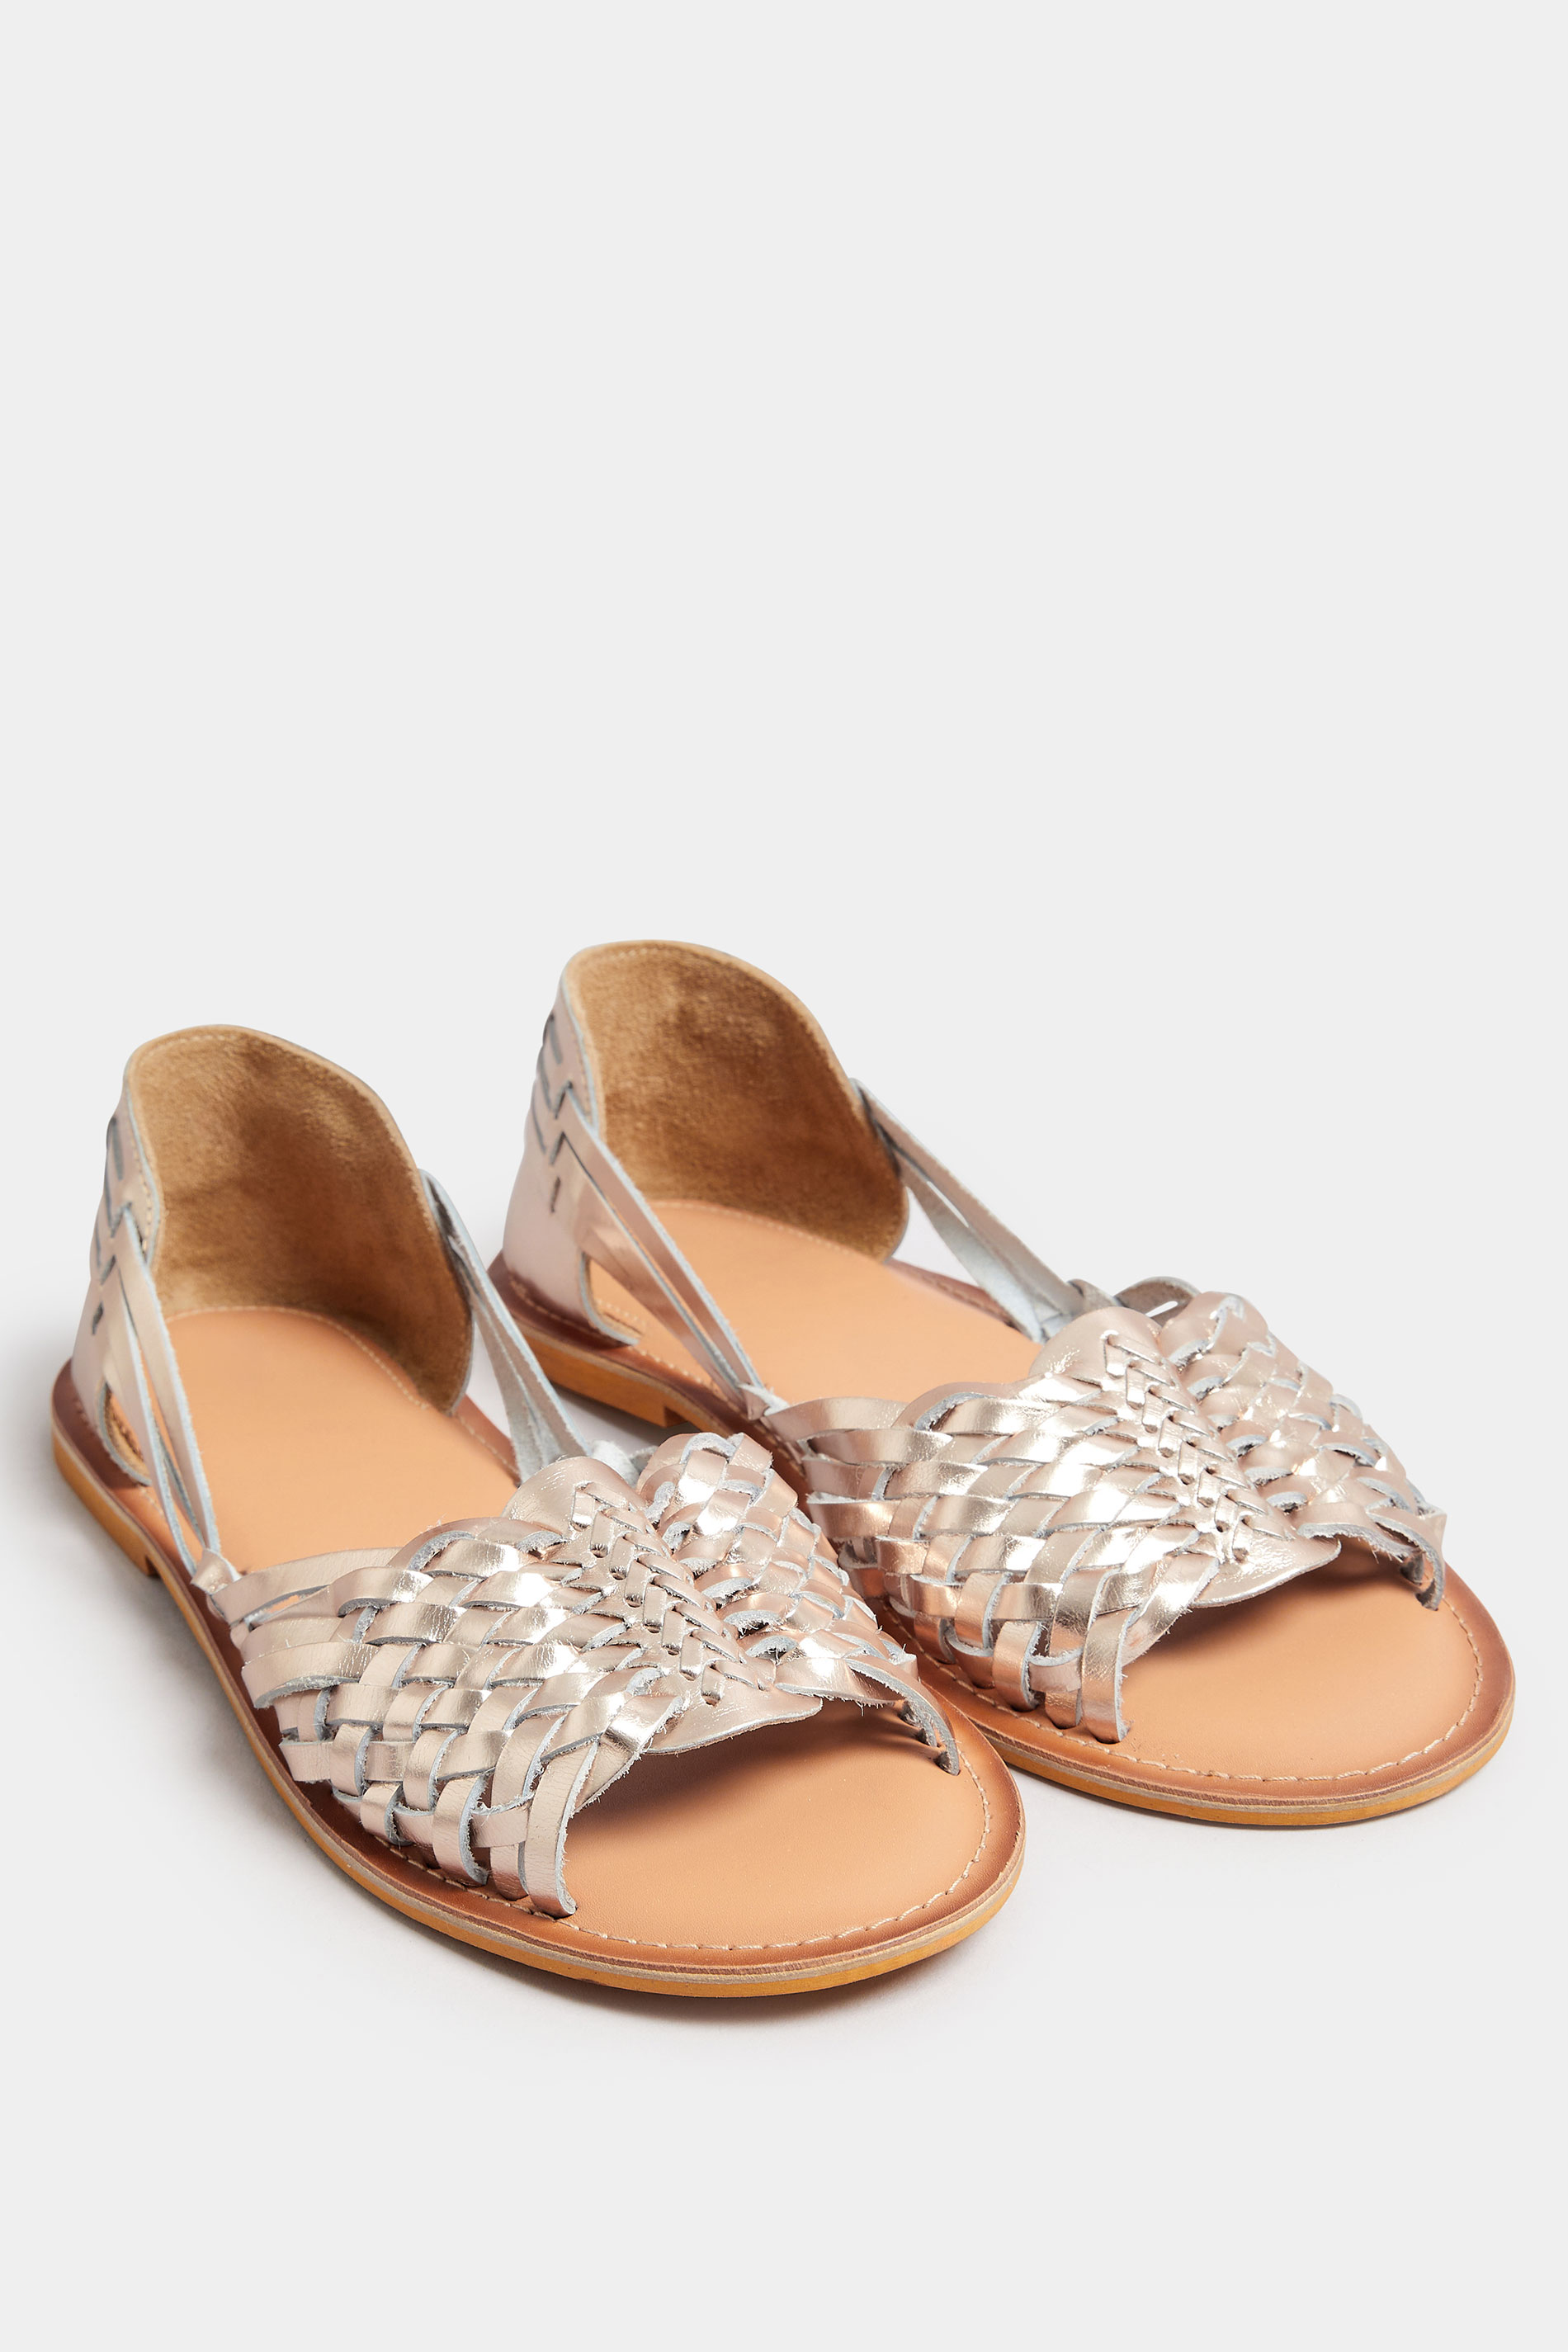 Gold Woven Leather Mules In Extra Wide EEE FIt | Yours Clothing 2